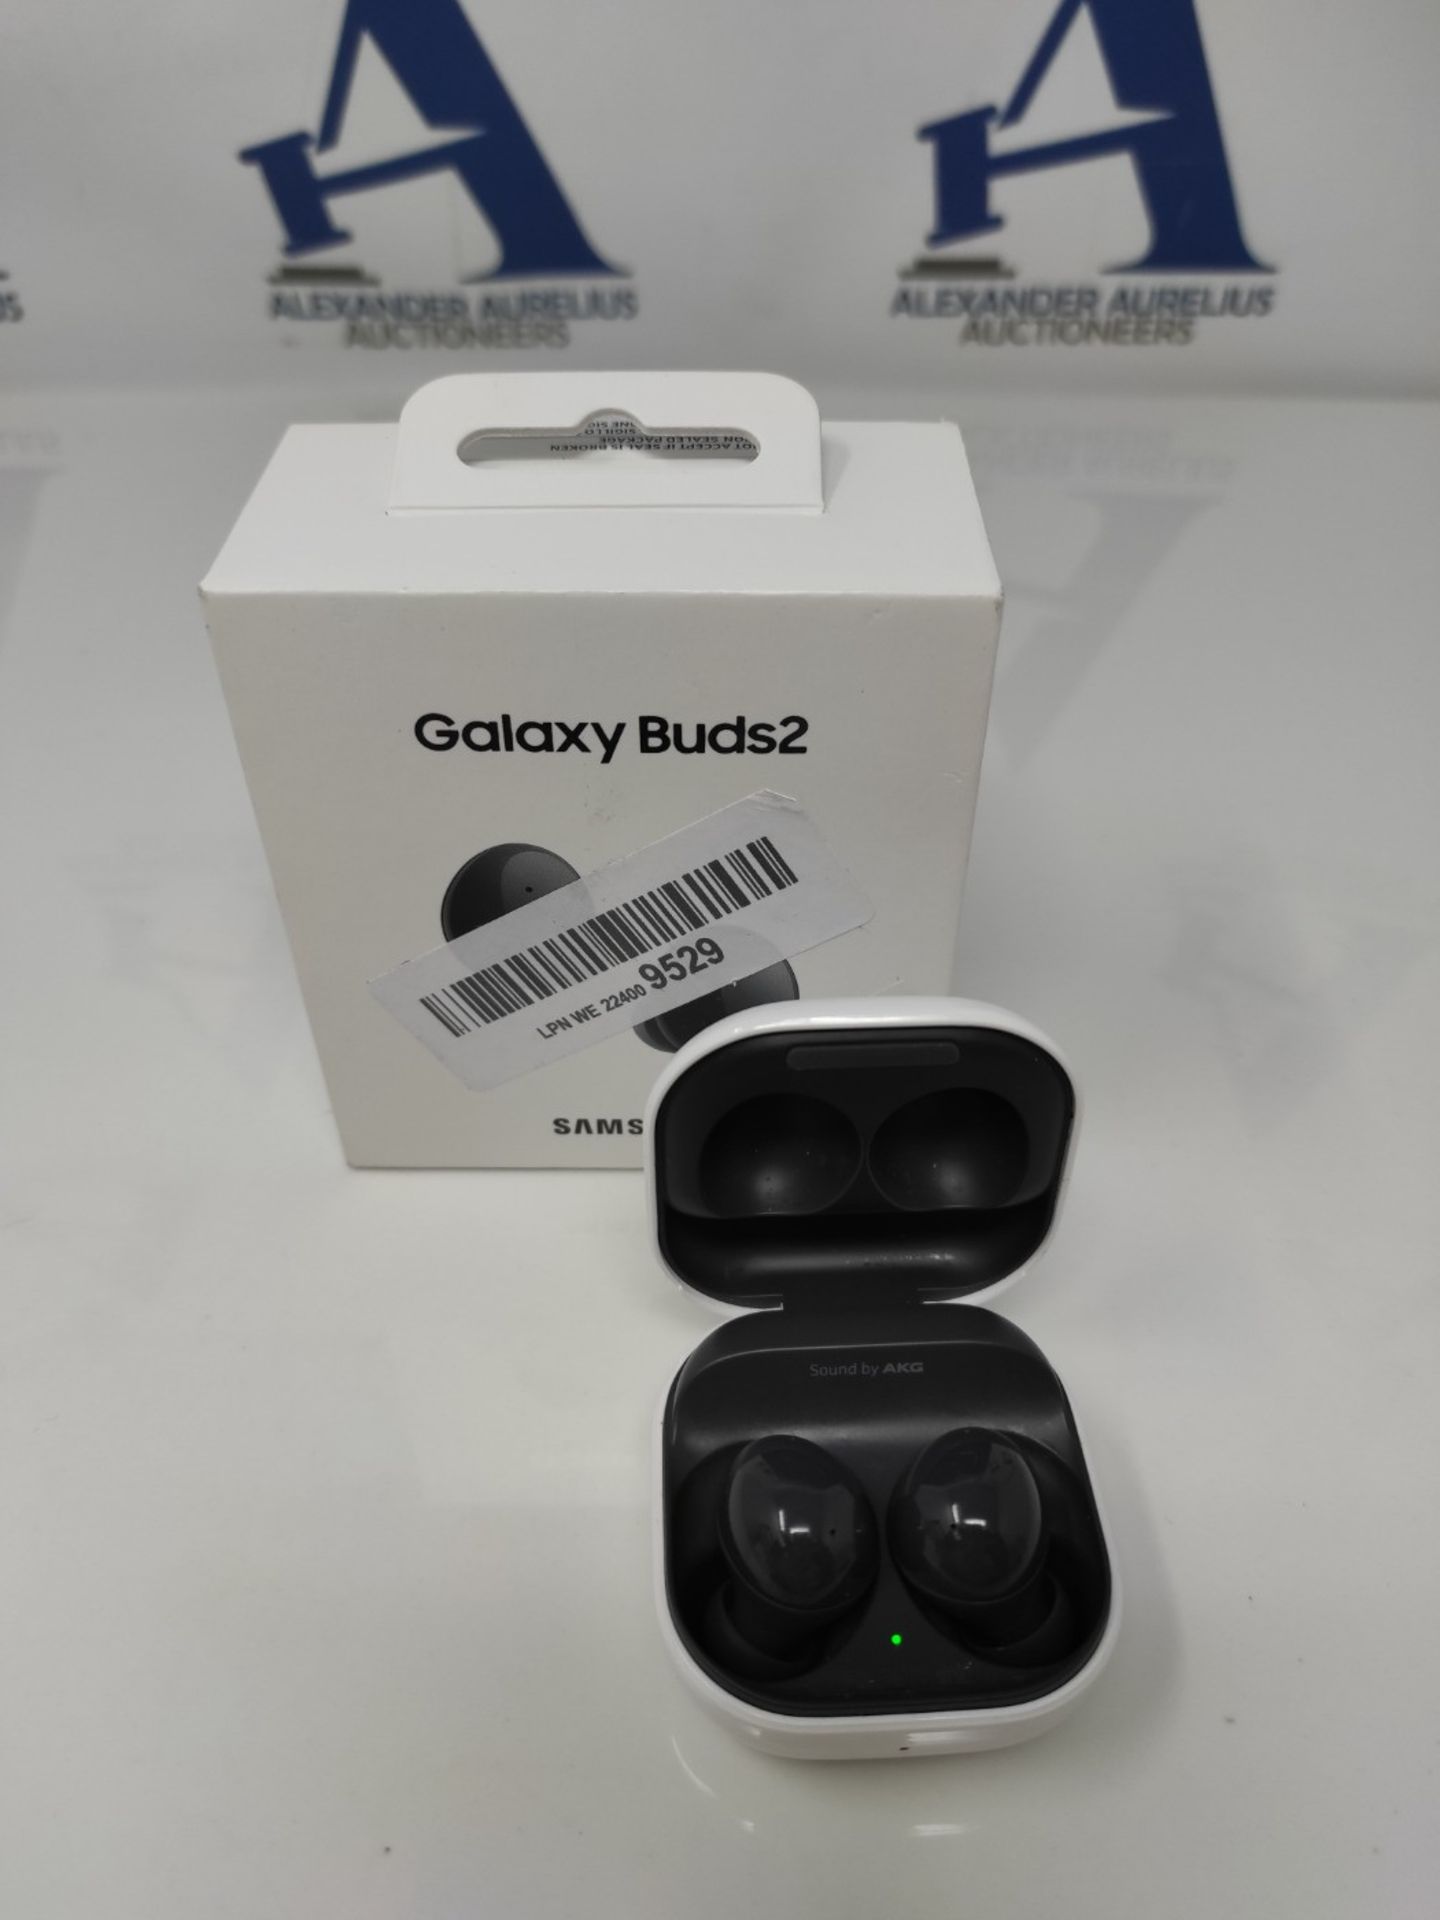 RRP £99.00 [INCOMPLETE] Samsung Galaxy Buds2 Wireless Earphones, 2 Year Extended Manufacturer War - Image 2 of 3